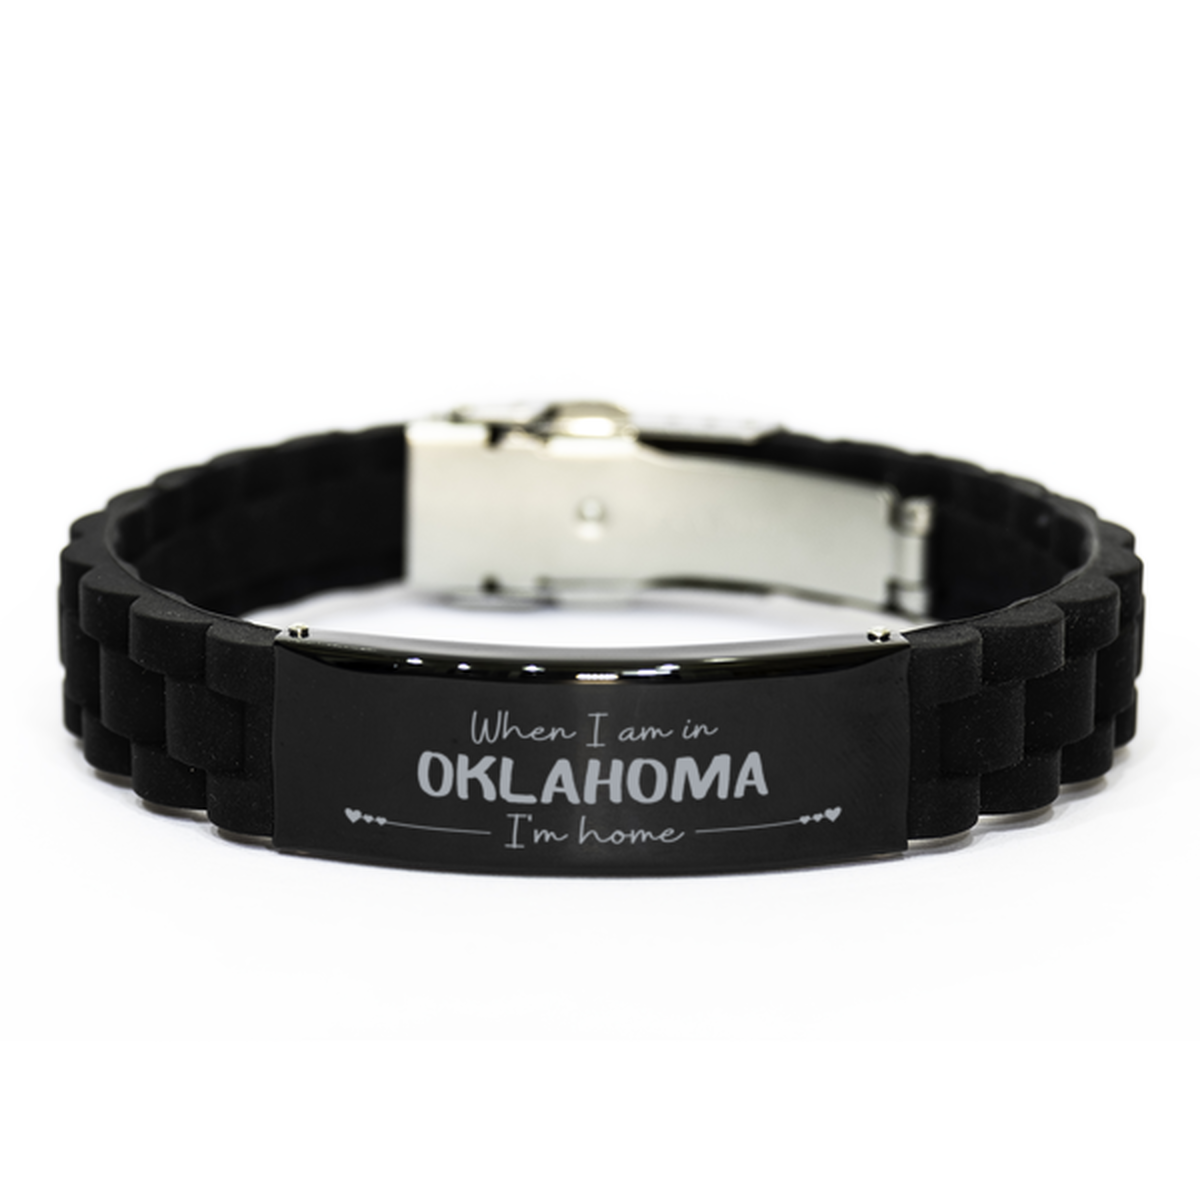 When I am in Oklahoma I'm home Black Glidelock Clasp Bracelet, Cheap Gifts For Oklahoma, State Oklahoma Birthday Gifts for Friends Coworker